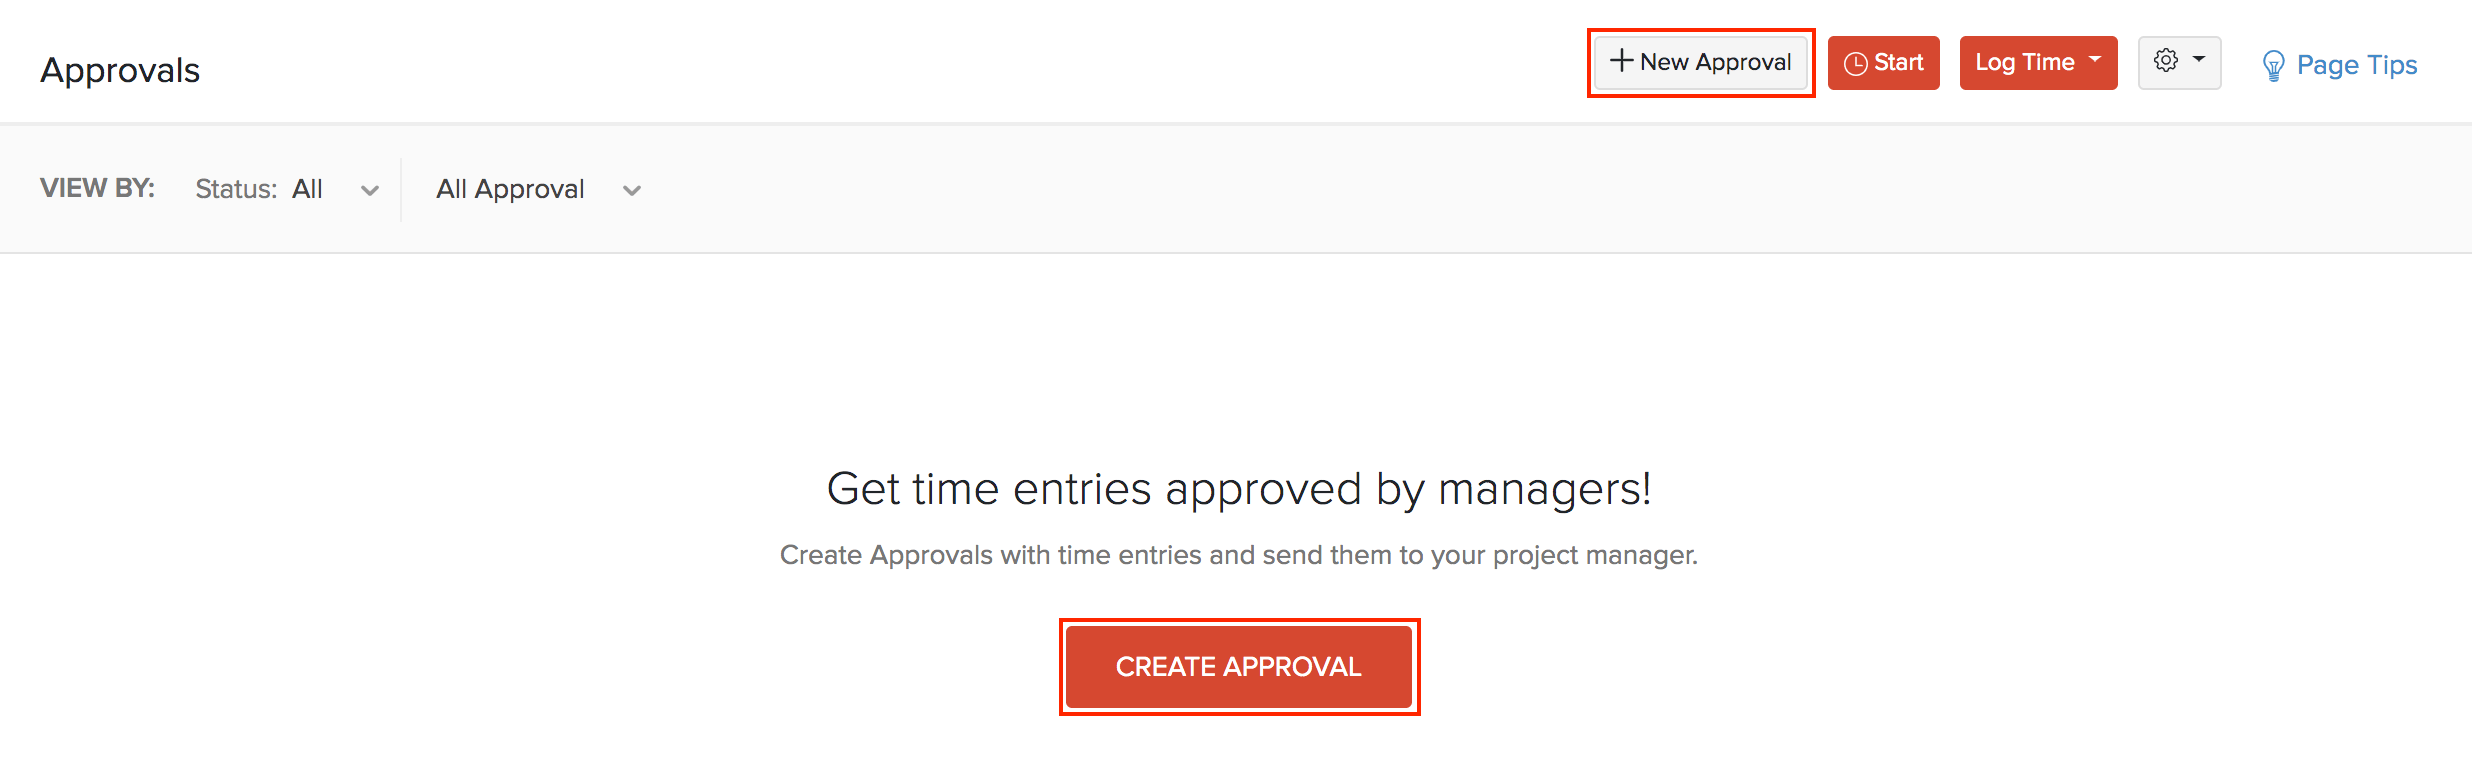 Create Approval